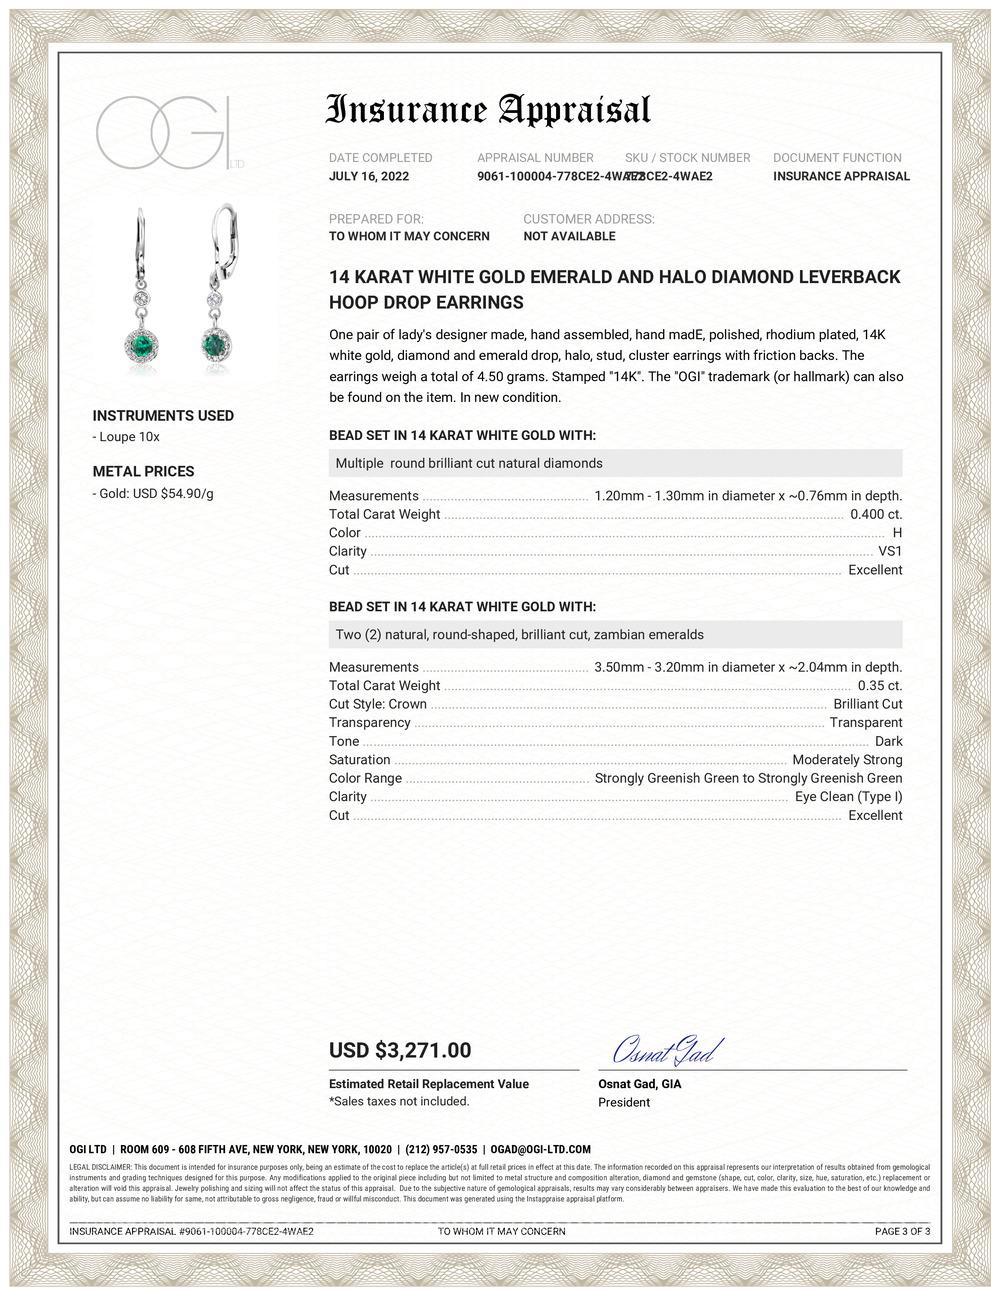 Fourteen karats white gold drop lever back hoop cluster earrings 
Diamonds weighing 0.40 carat
Emeralds weighing 0.35 carats 
Fine quality emerald hue tone color is of deep forest green
New Earrings
Handmade in the USA
Some gemstones are very hard